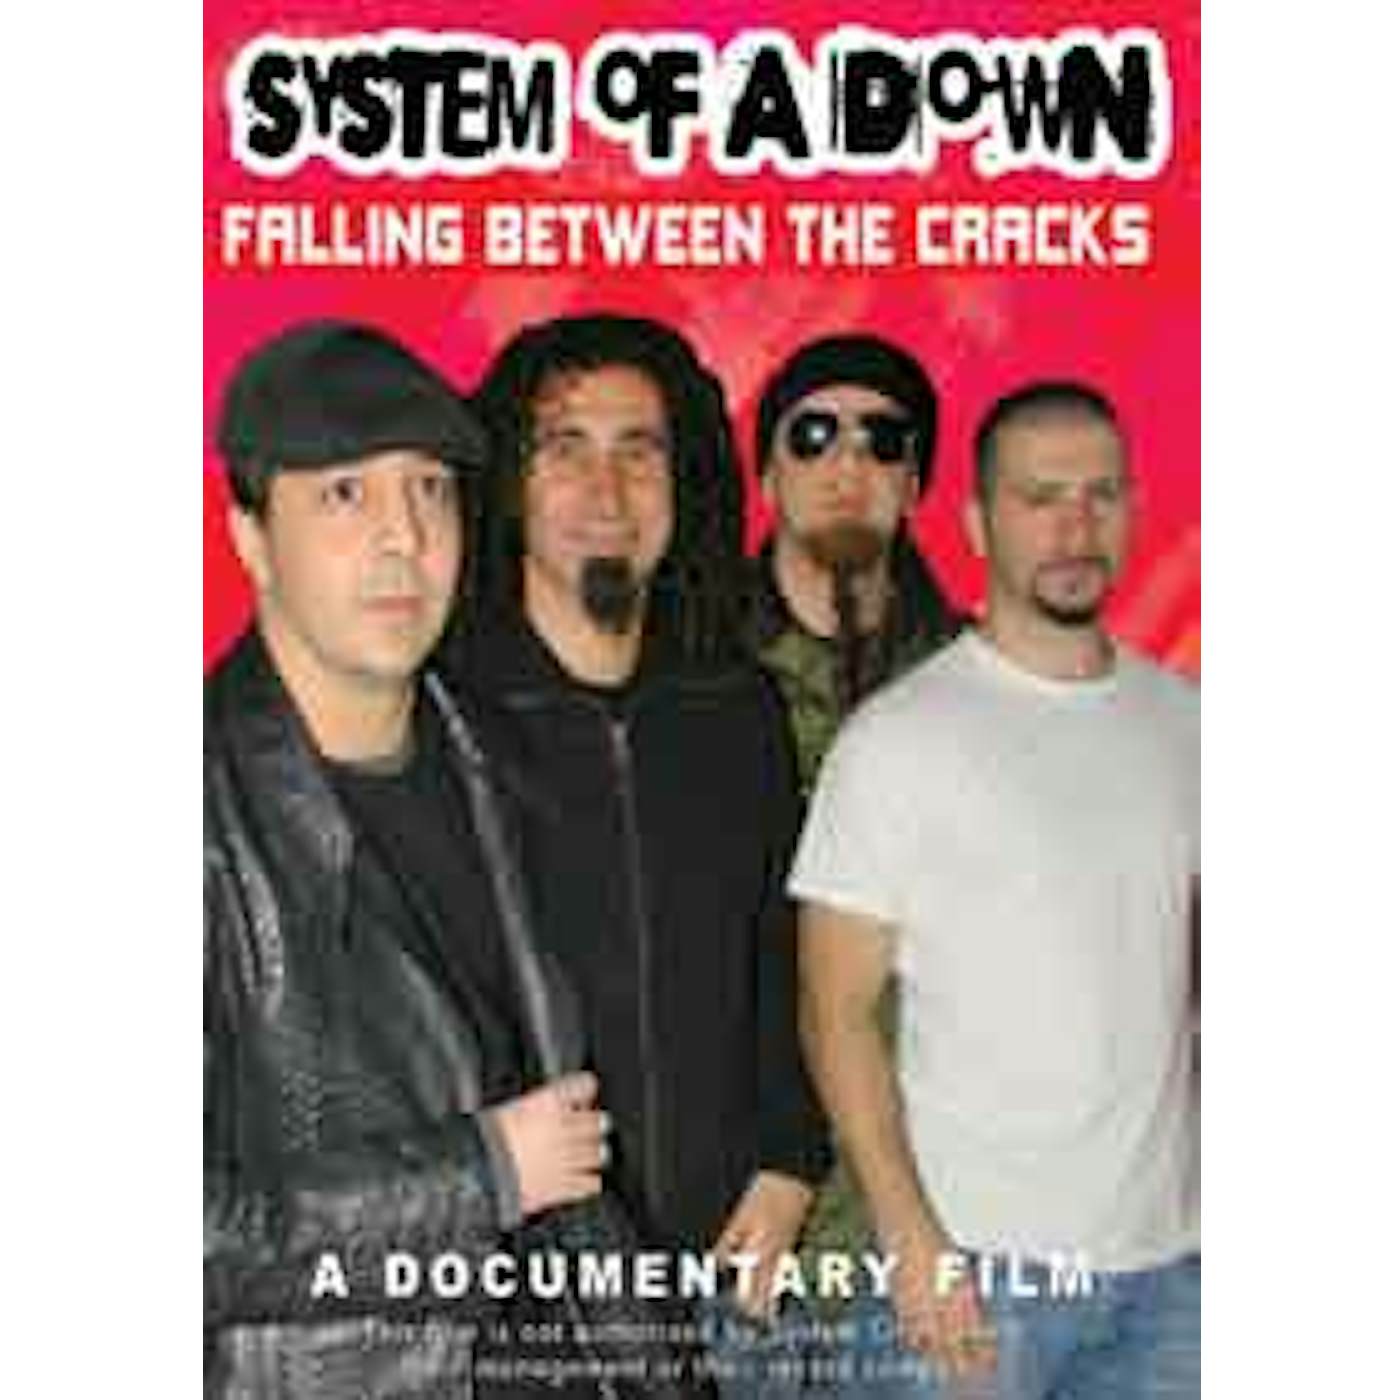 System Of A Down DVD - Falling Between The Cracks